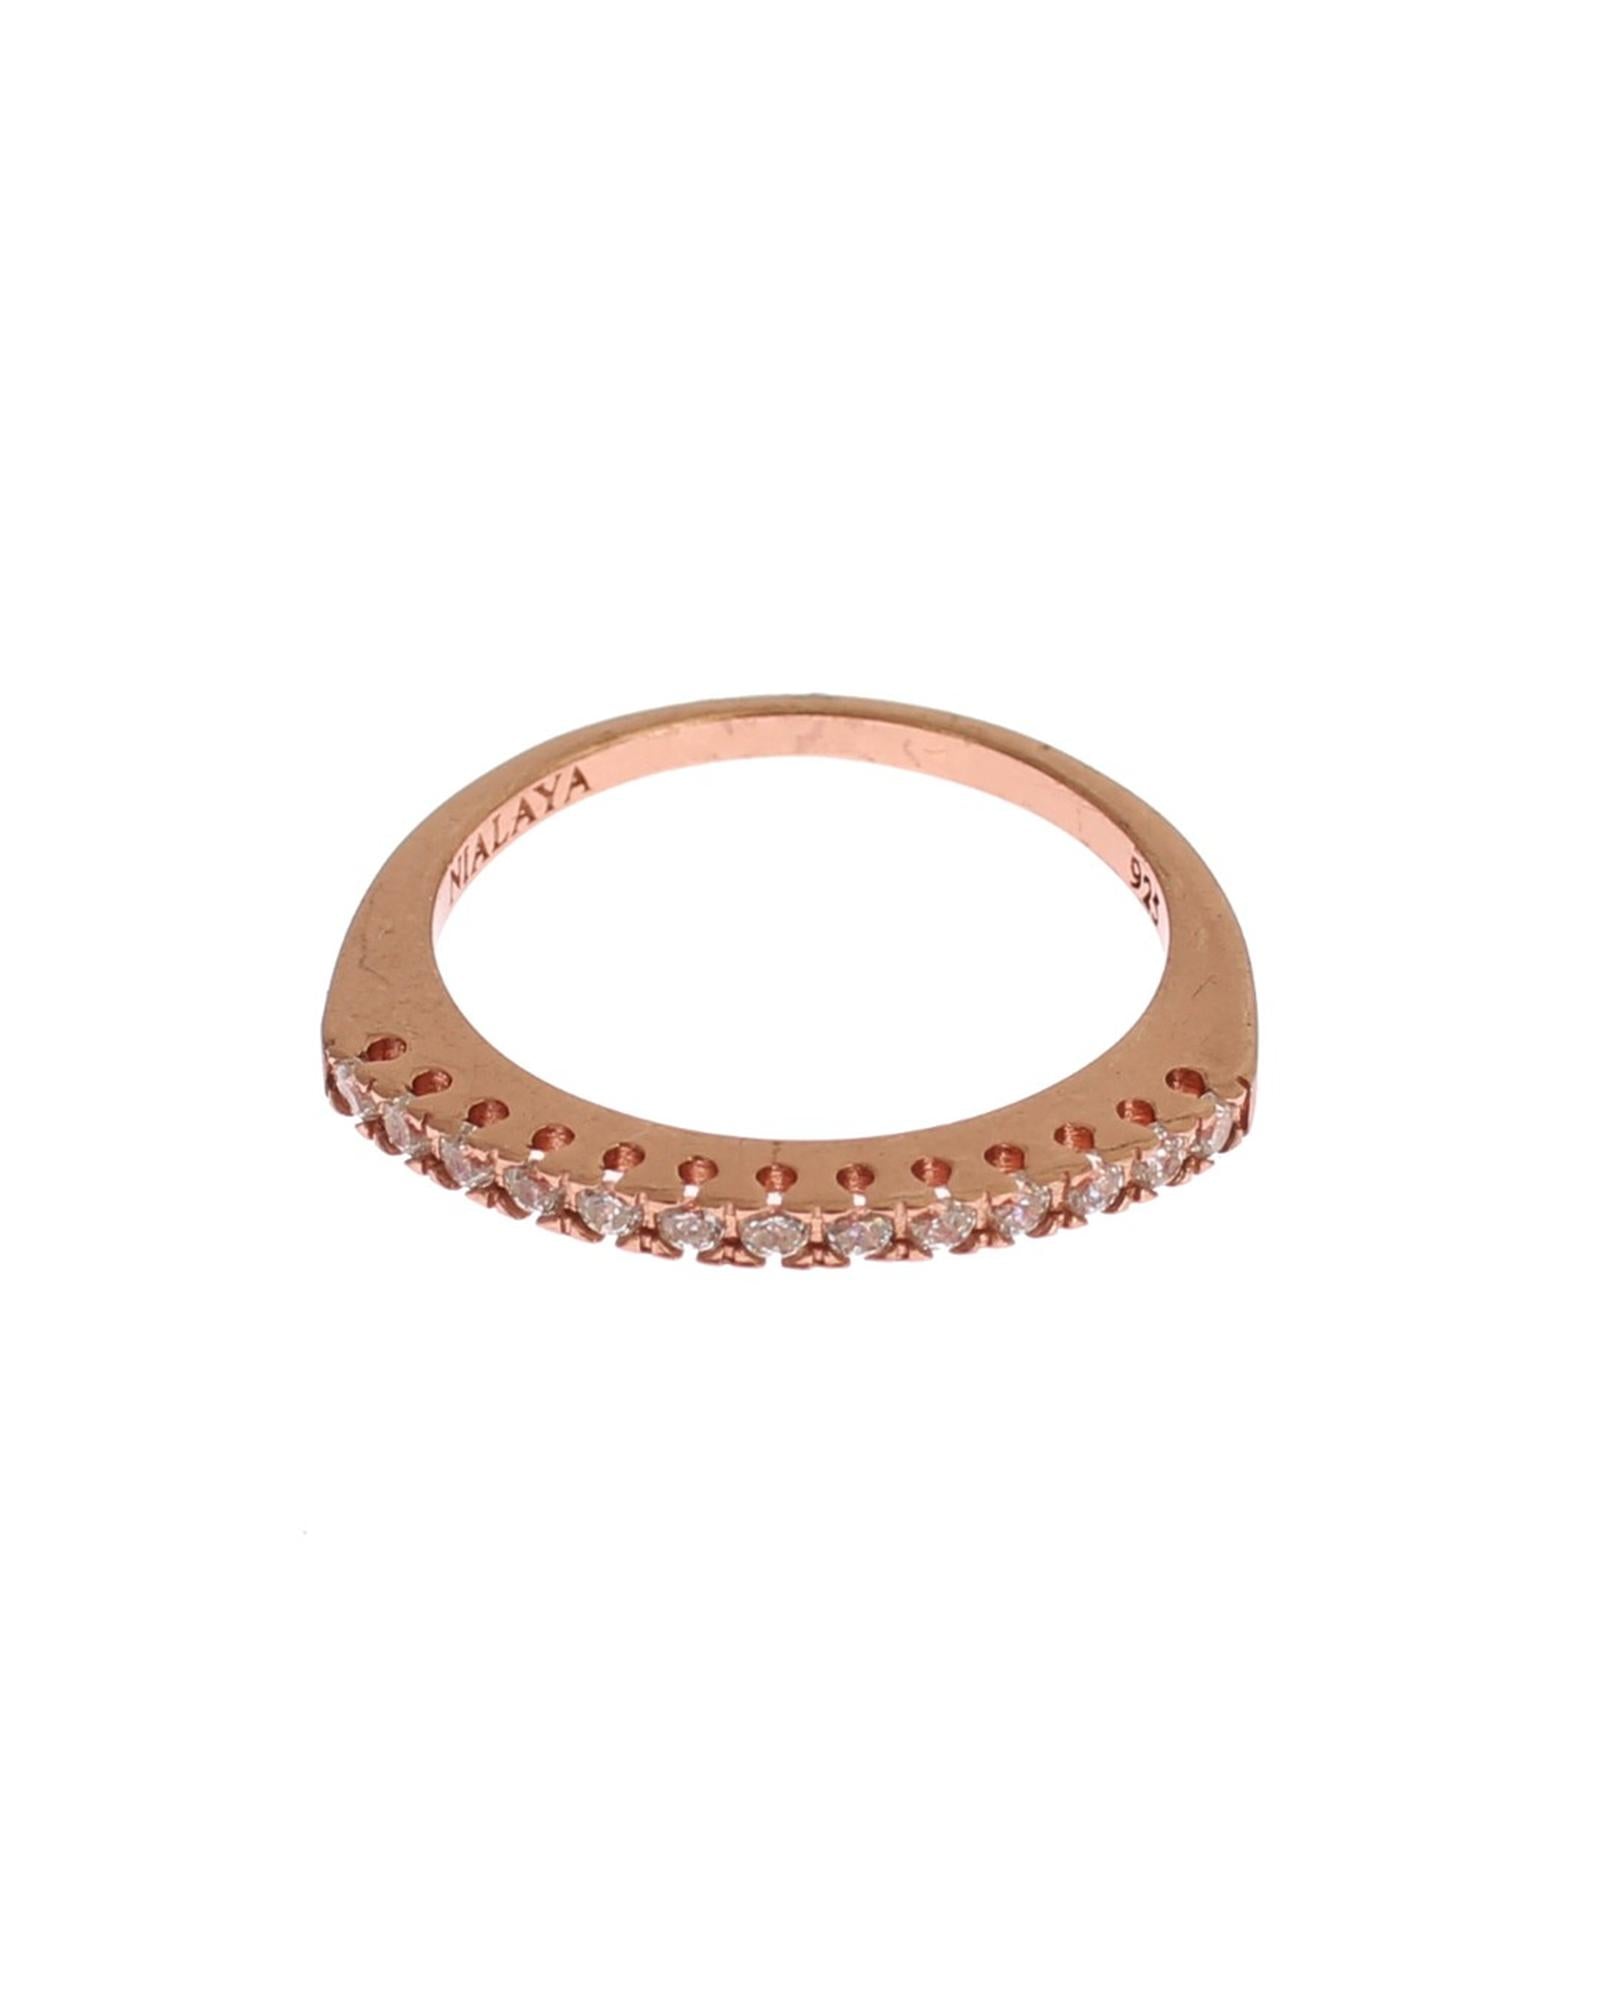 NIALAYA 18K Gold Plated Ring with Clear CZ Crystals 44 EU Women